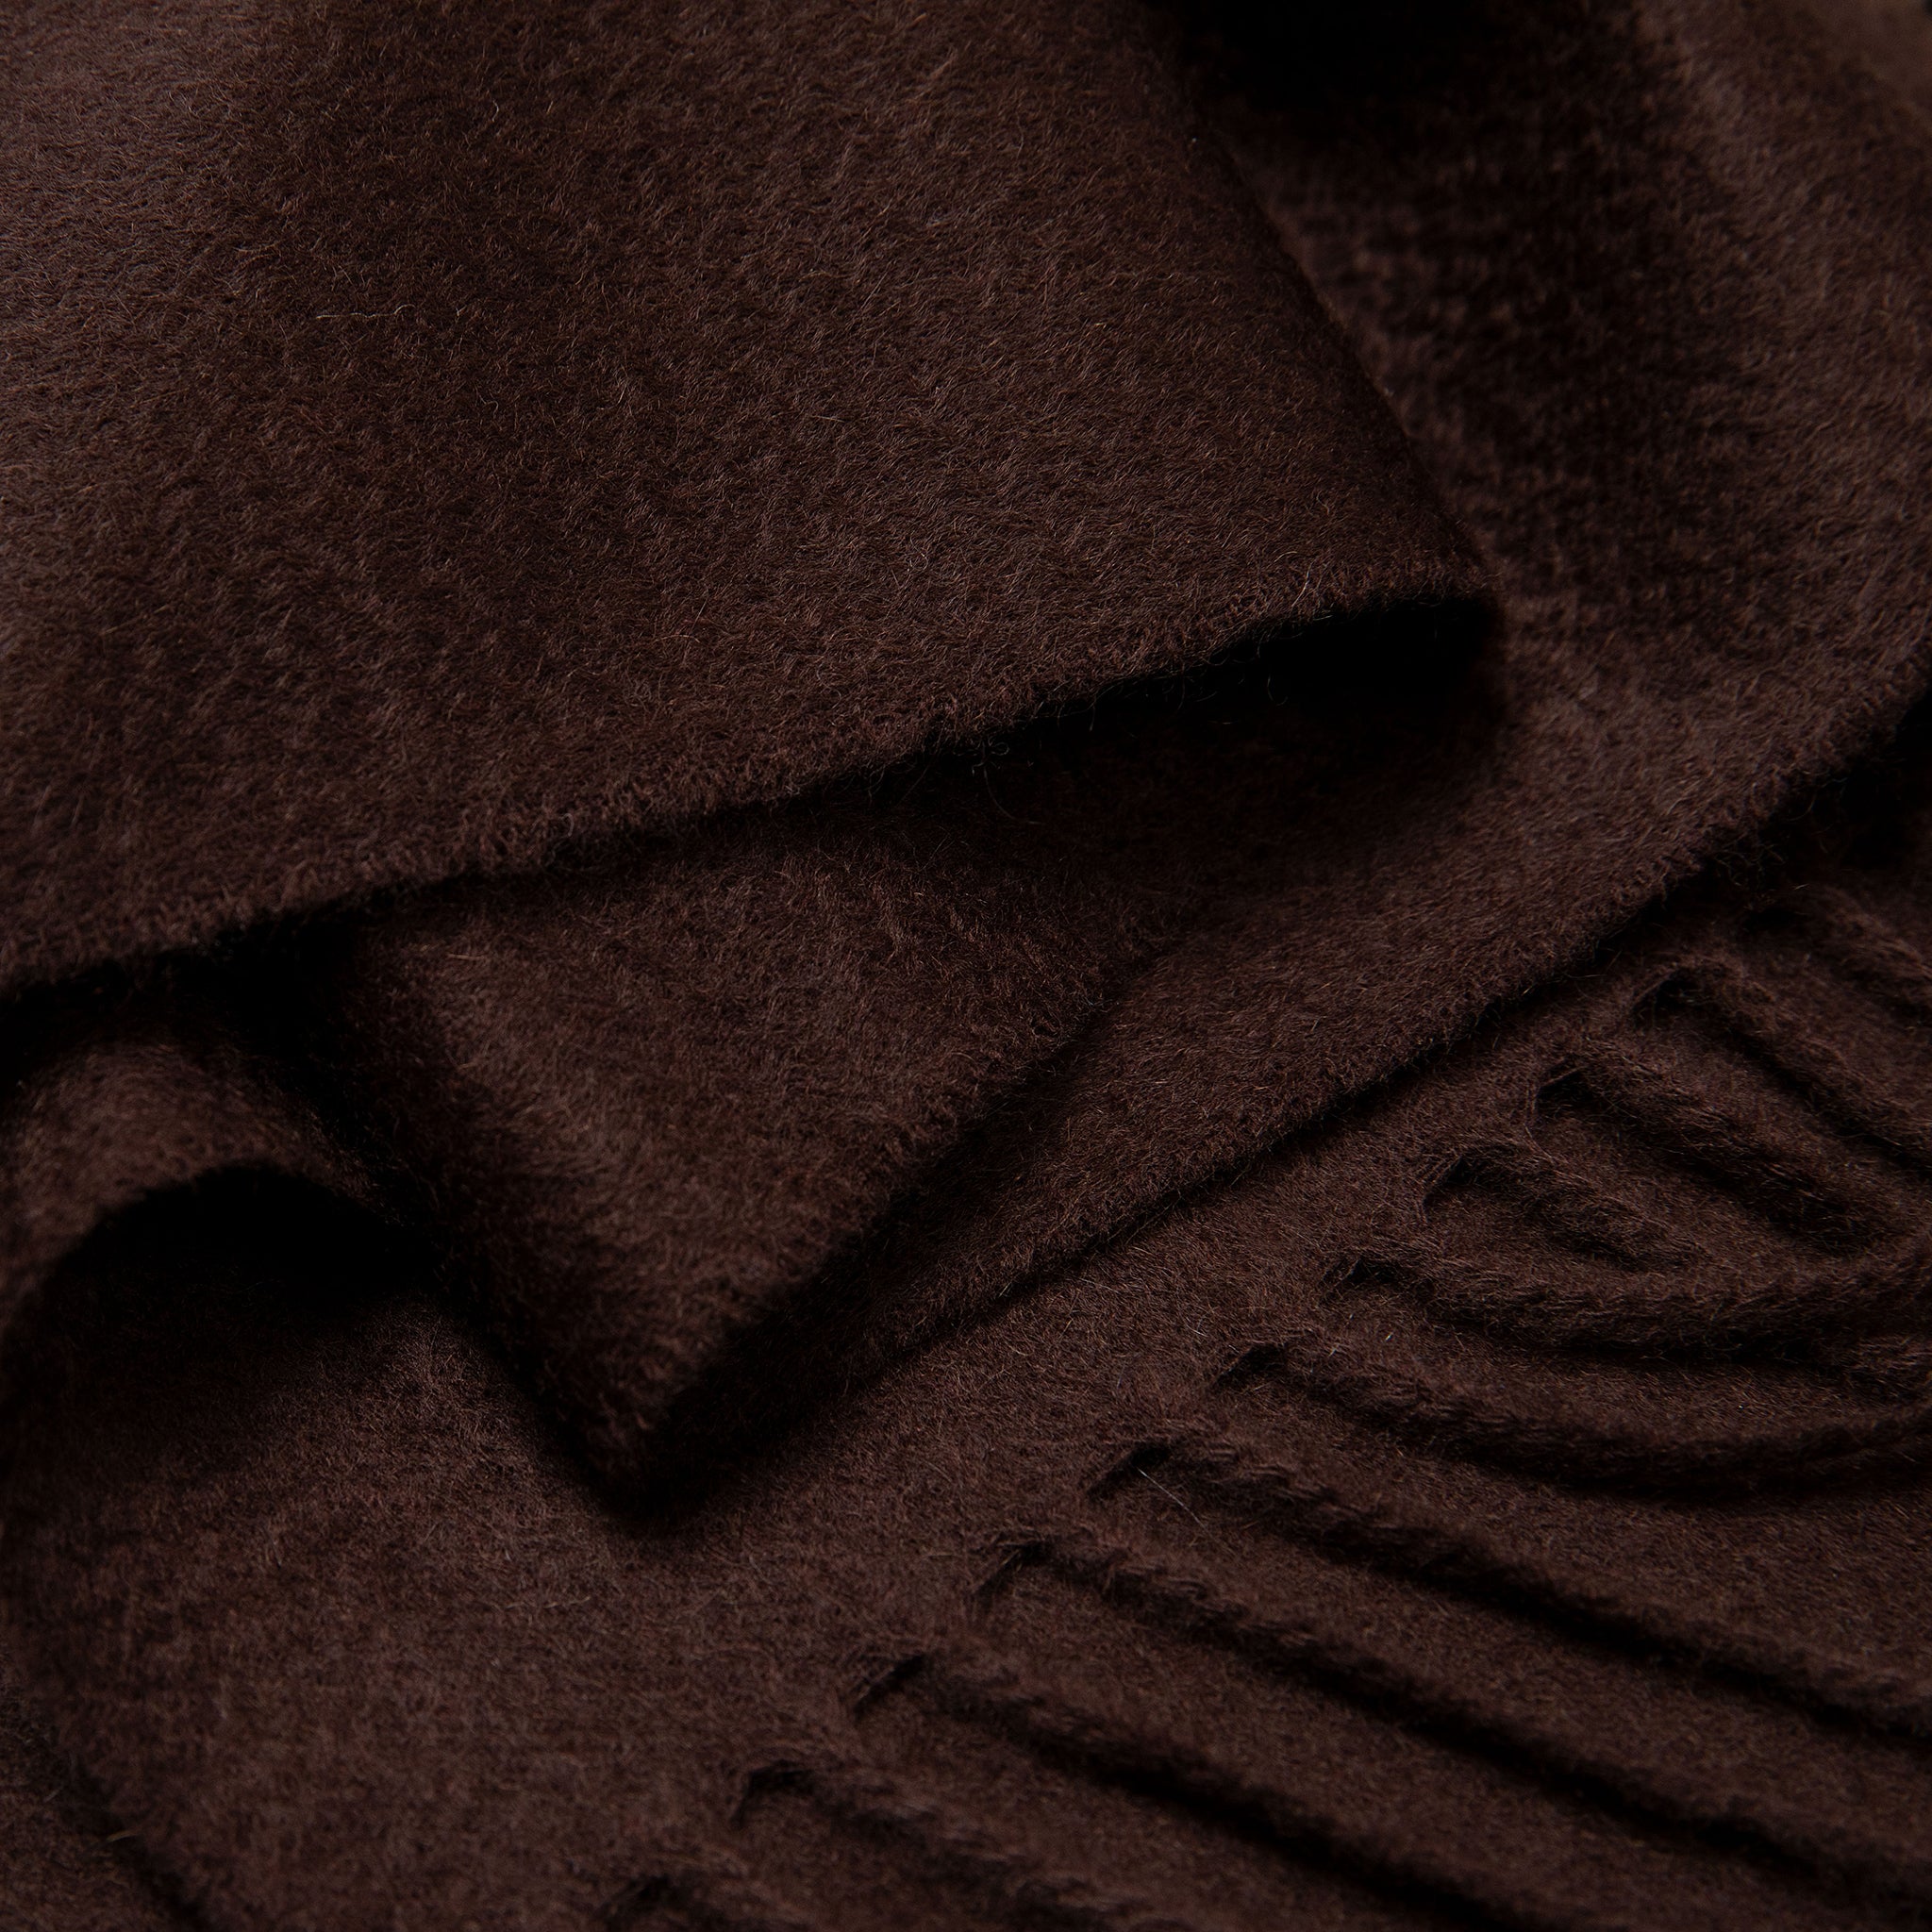 Woven cashmere scarf in espresso brown - Colhay's